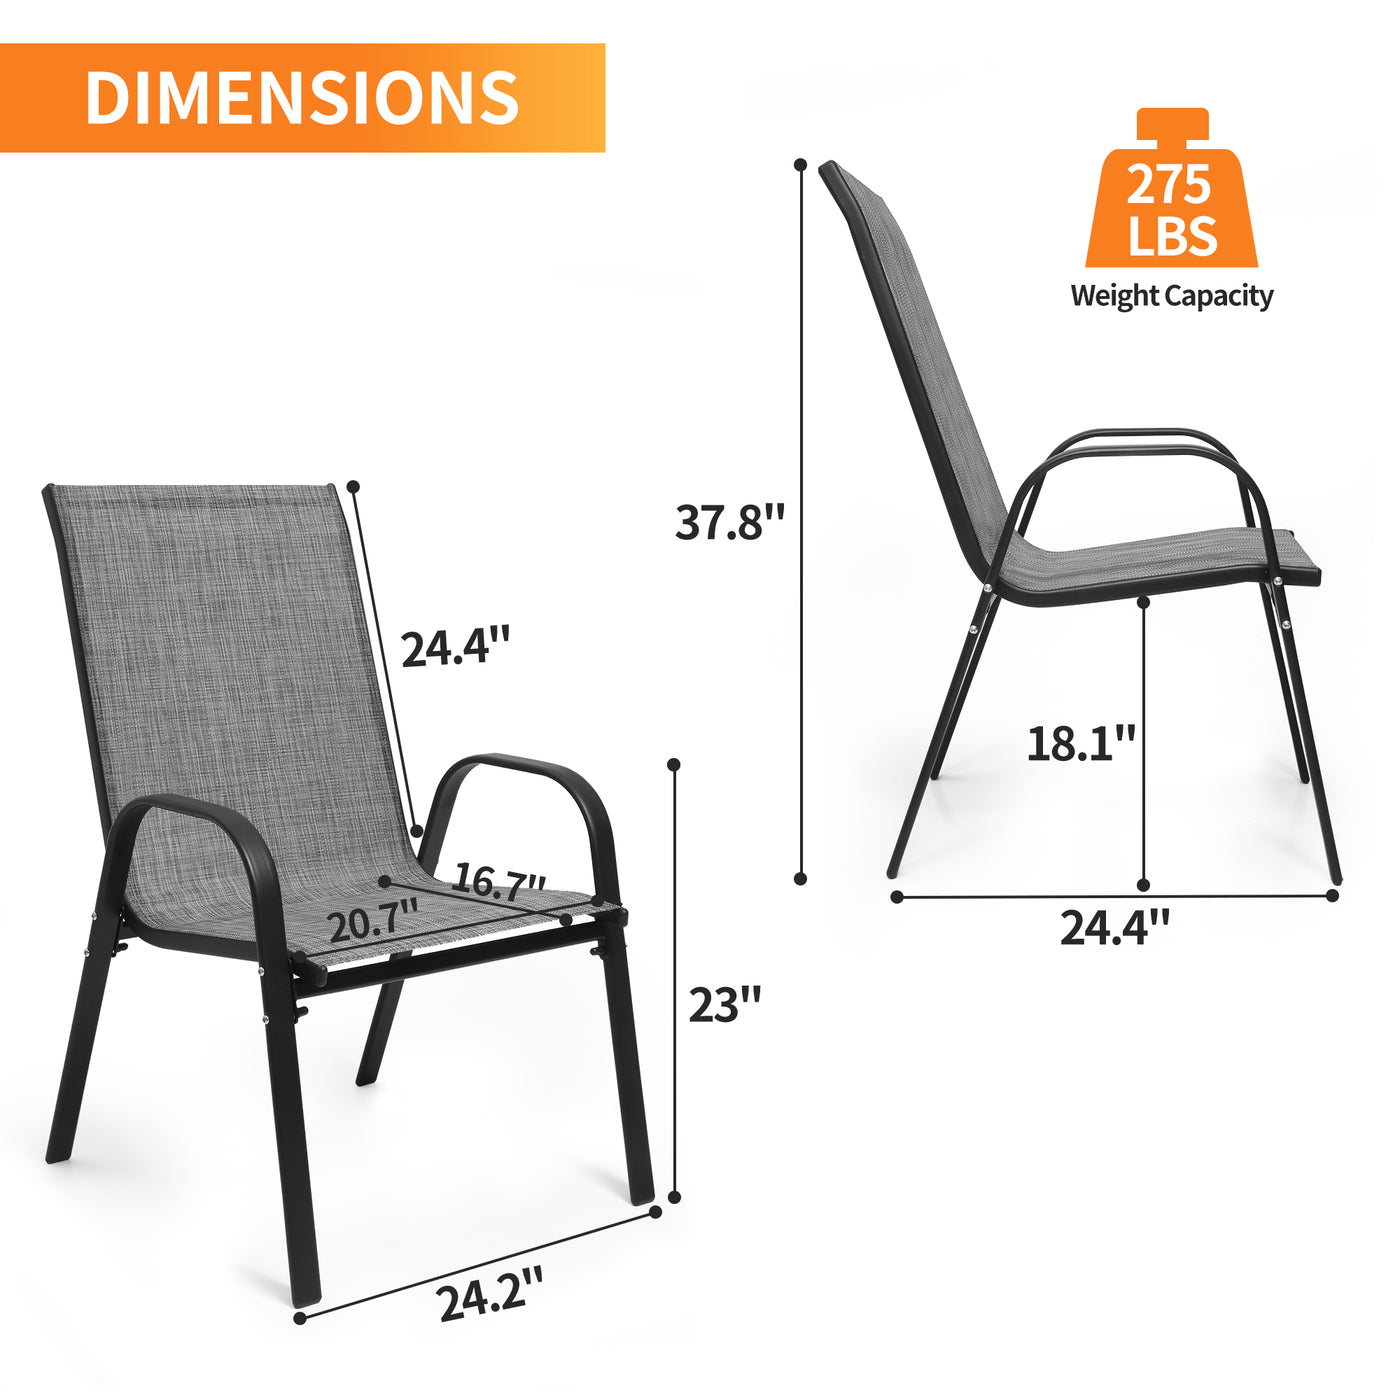 Pizzello Patio Dining Chairs#size_2pcs